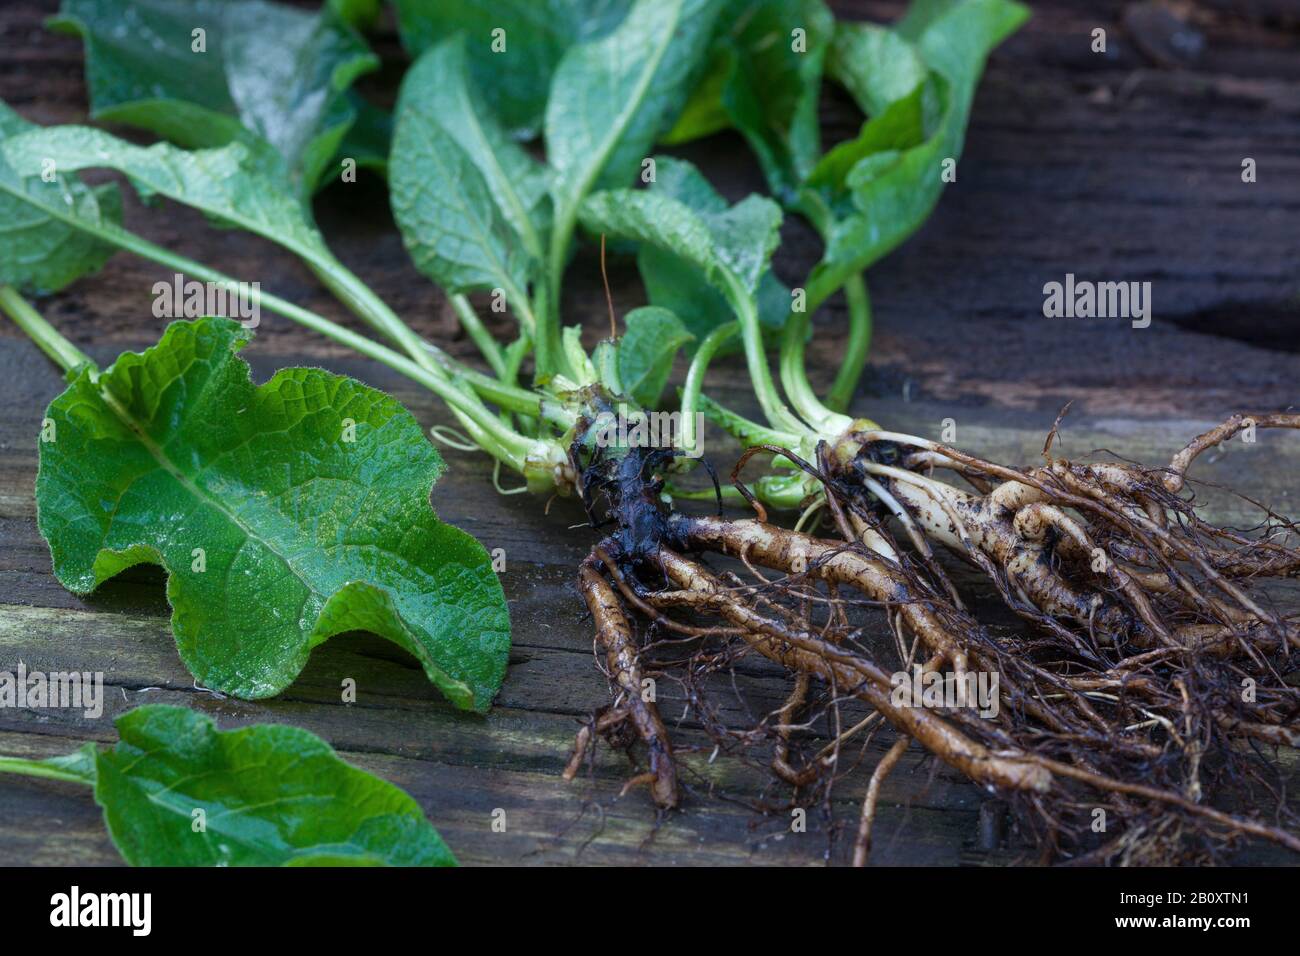 common comfrey (Symphytum officinale), collected roots, Germany Stock Photo